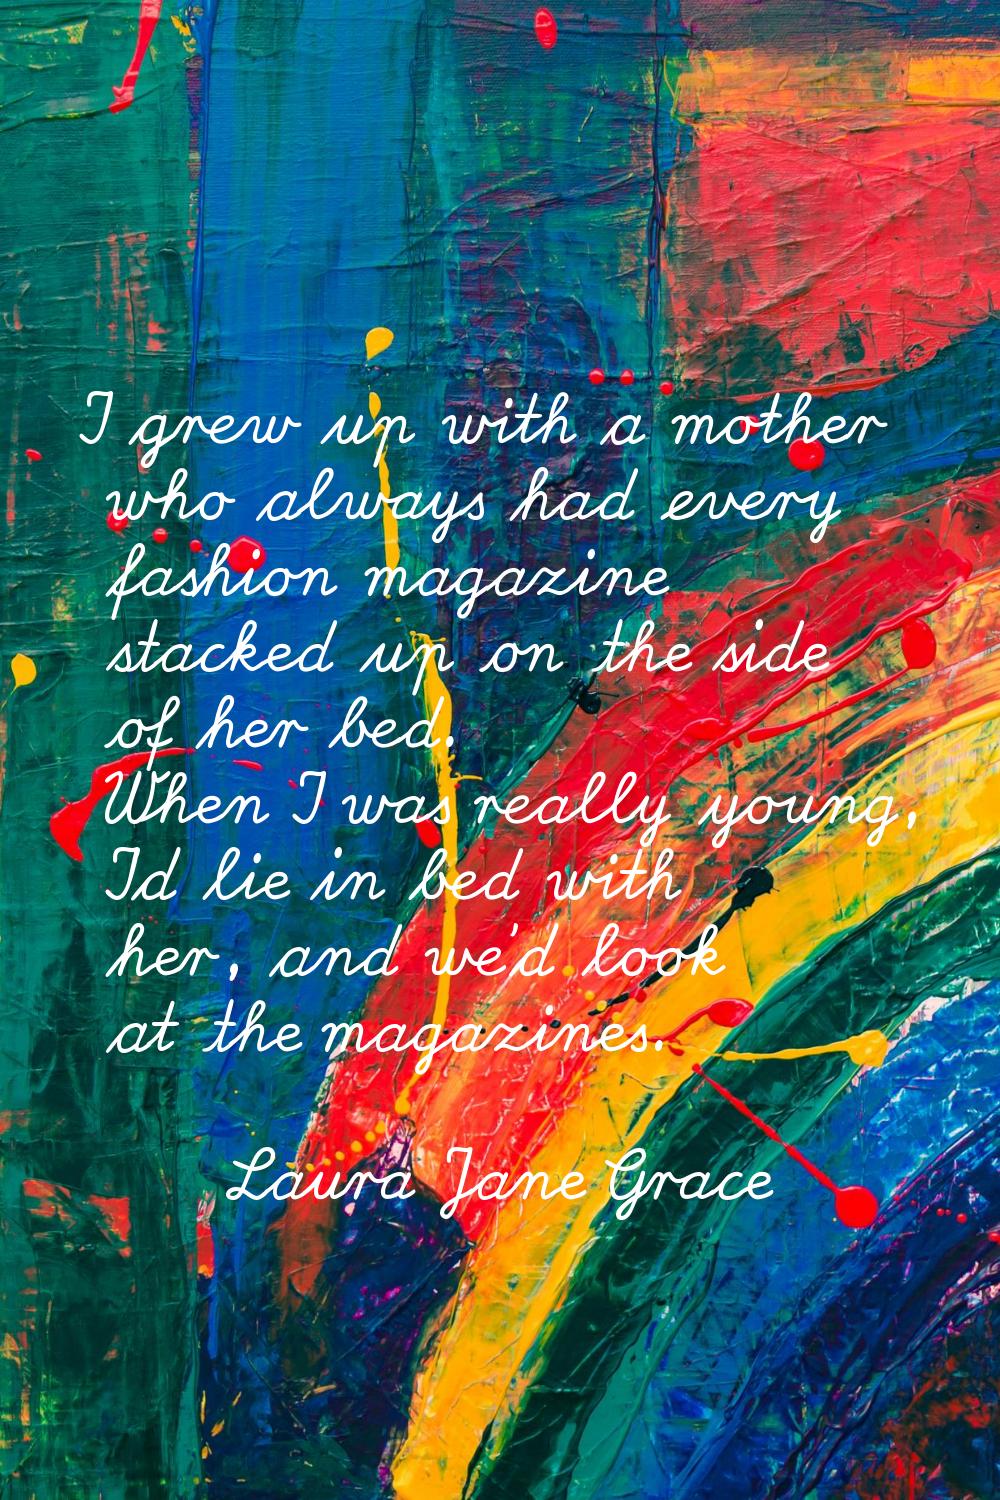 I grew up with a mother who always had every fashion magazine stacked up on the side of her bed. Wh